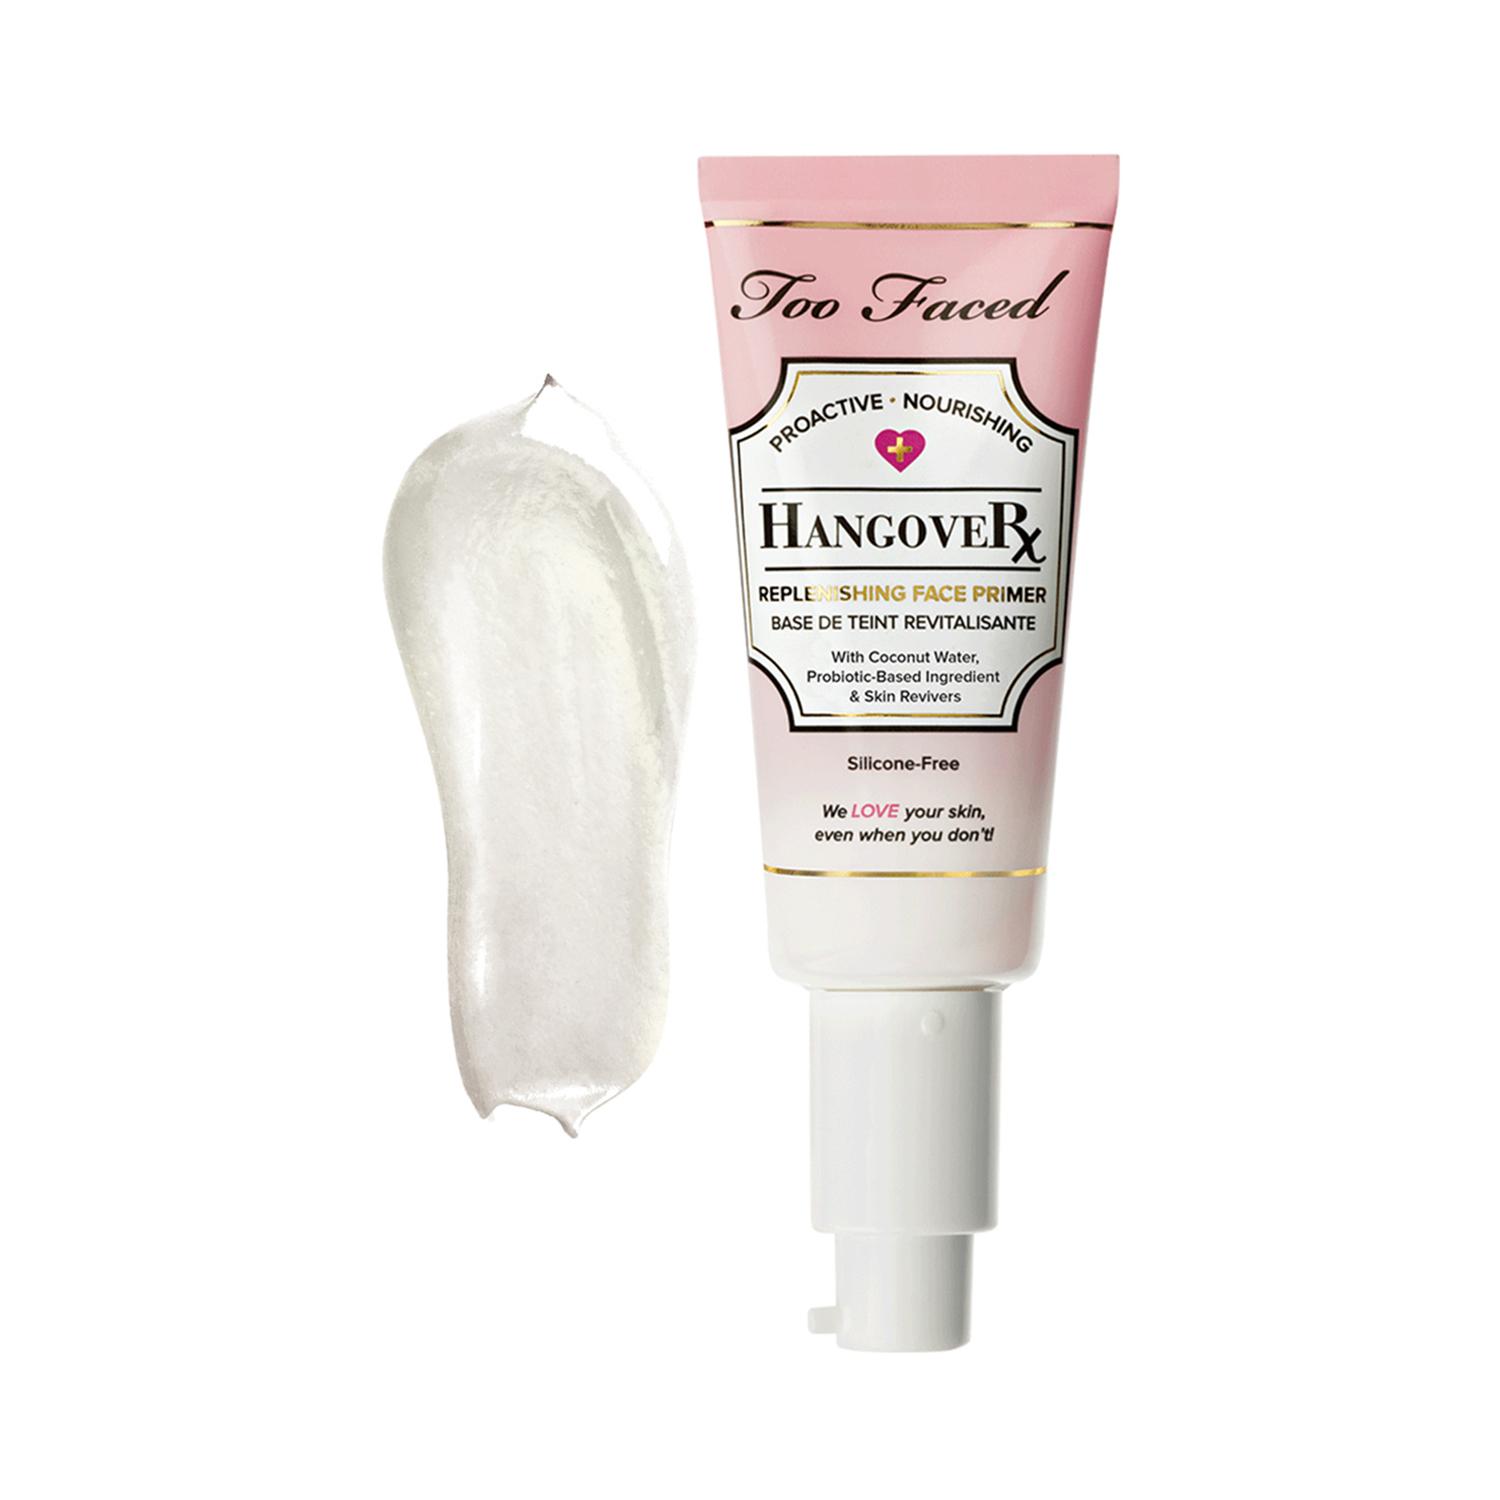 Too Faced | Too Faced Hangover Replenishing Face Primer (40ml)